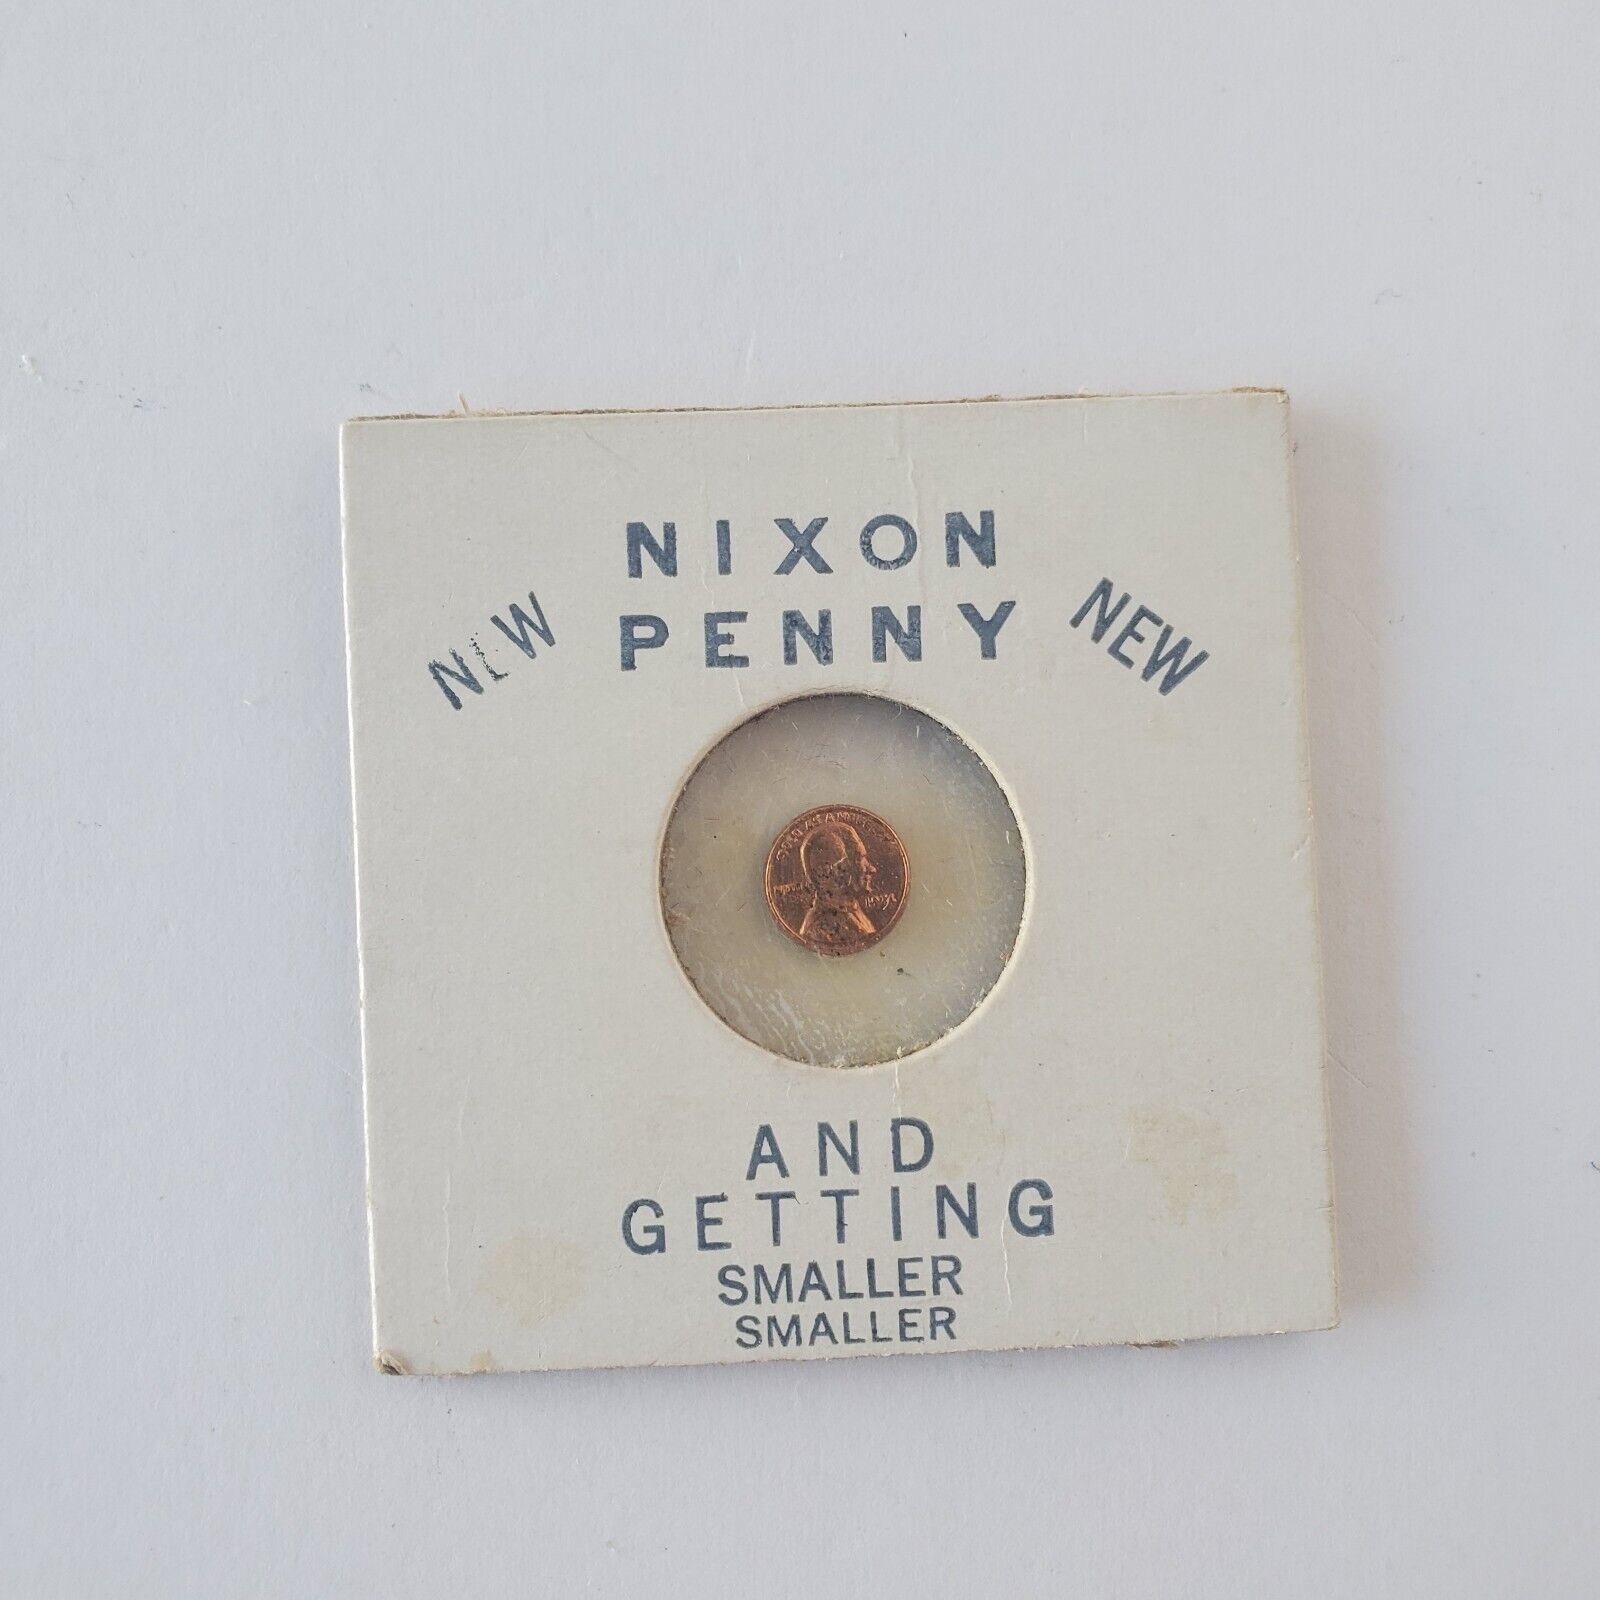 Vintage Nixon Penny And Getting Smaller Novelty Coin Collectible Political Joke